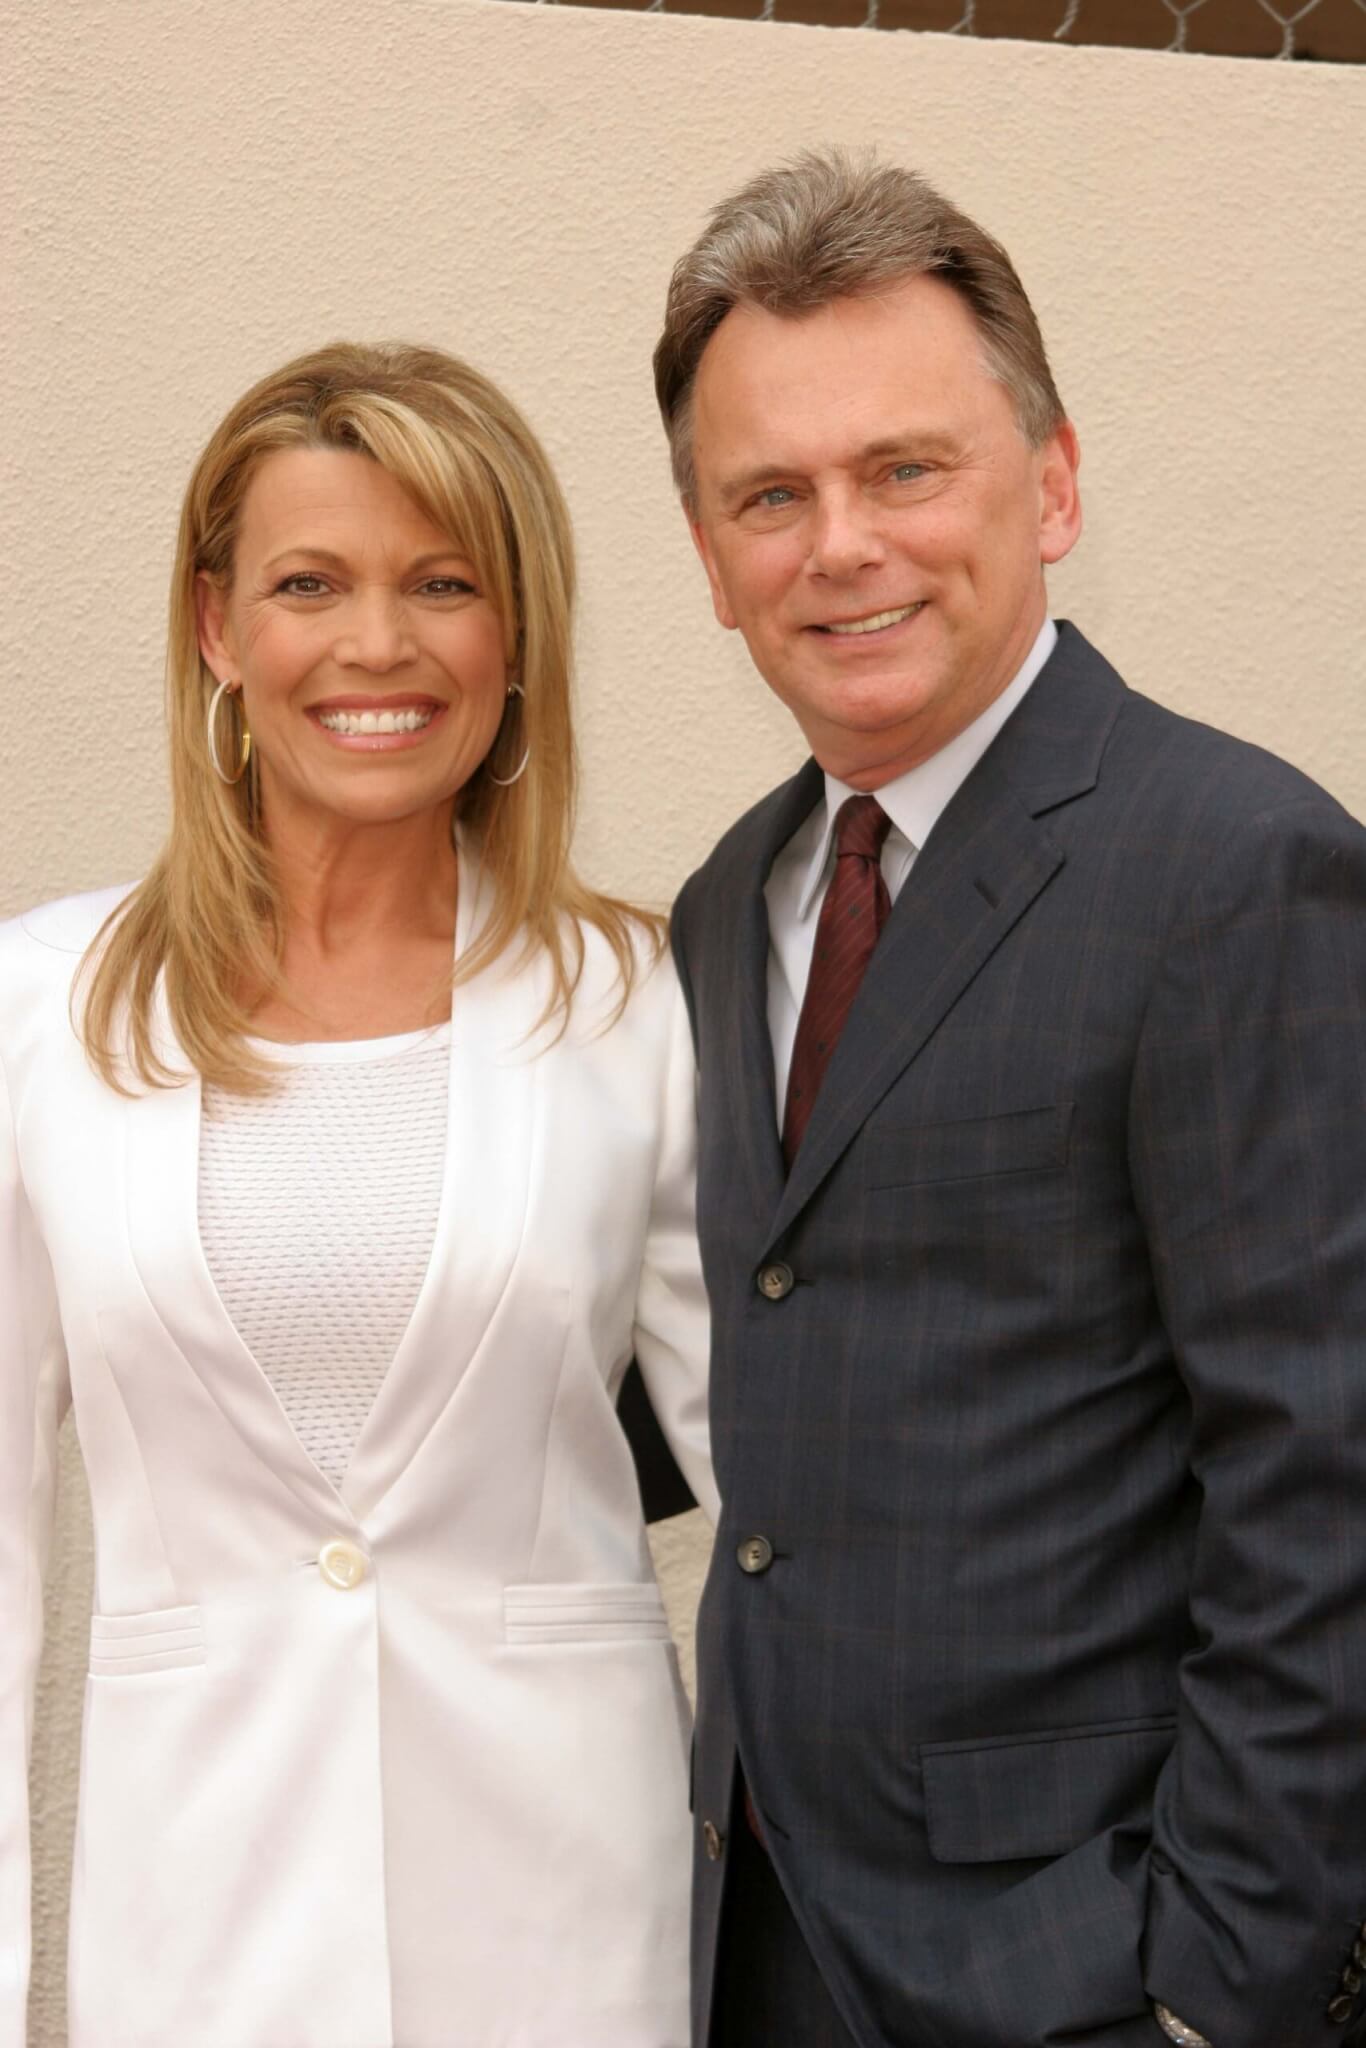 Pat Sajak and Vanna White in 2006 when Vanna was honored with a star on the Hollywood Walk of Fame